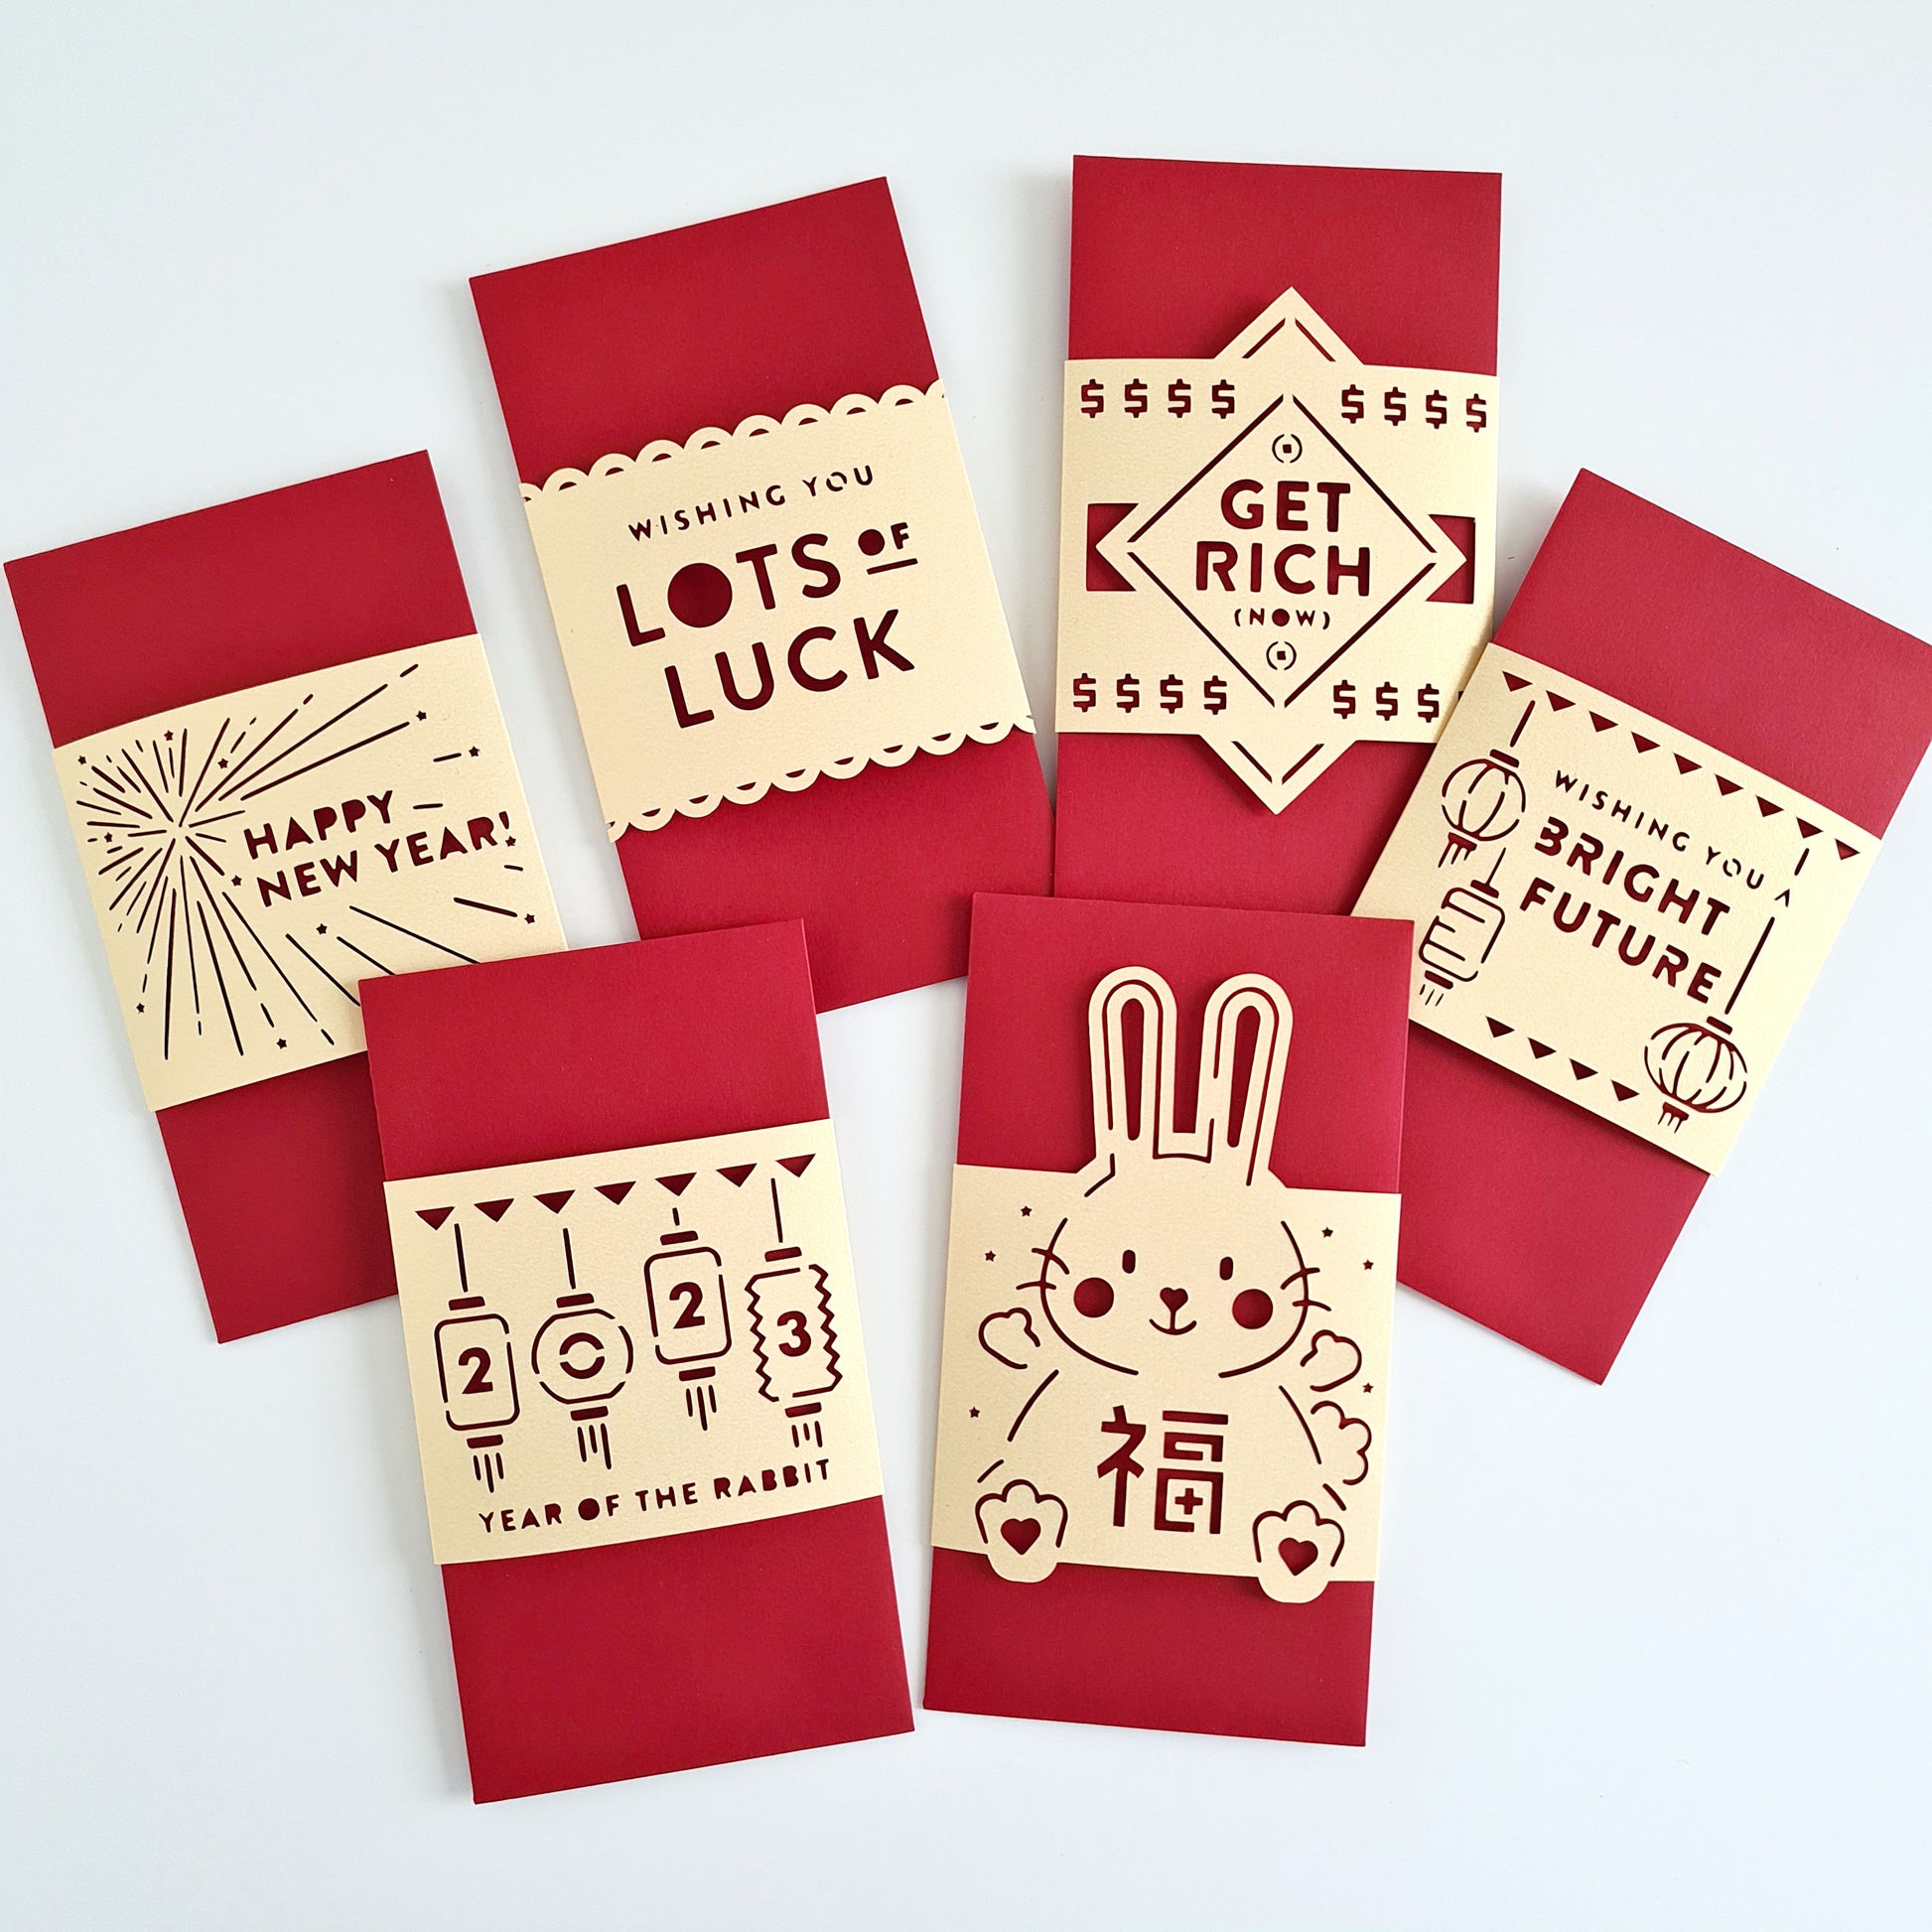 HOW TO MAKE LUCKY RED ENVELOPE FOR LUNAR NEW YEAR / DIY LUCKY